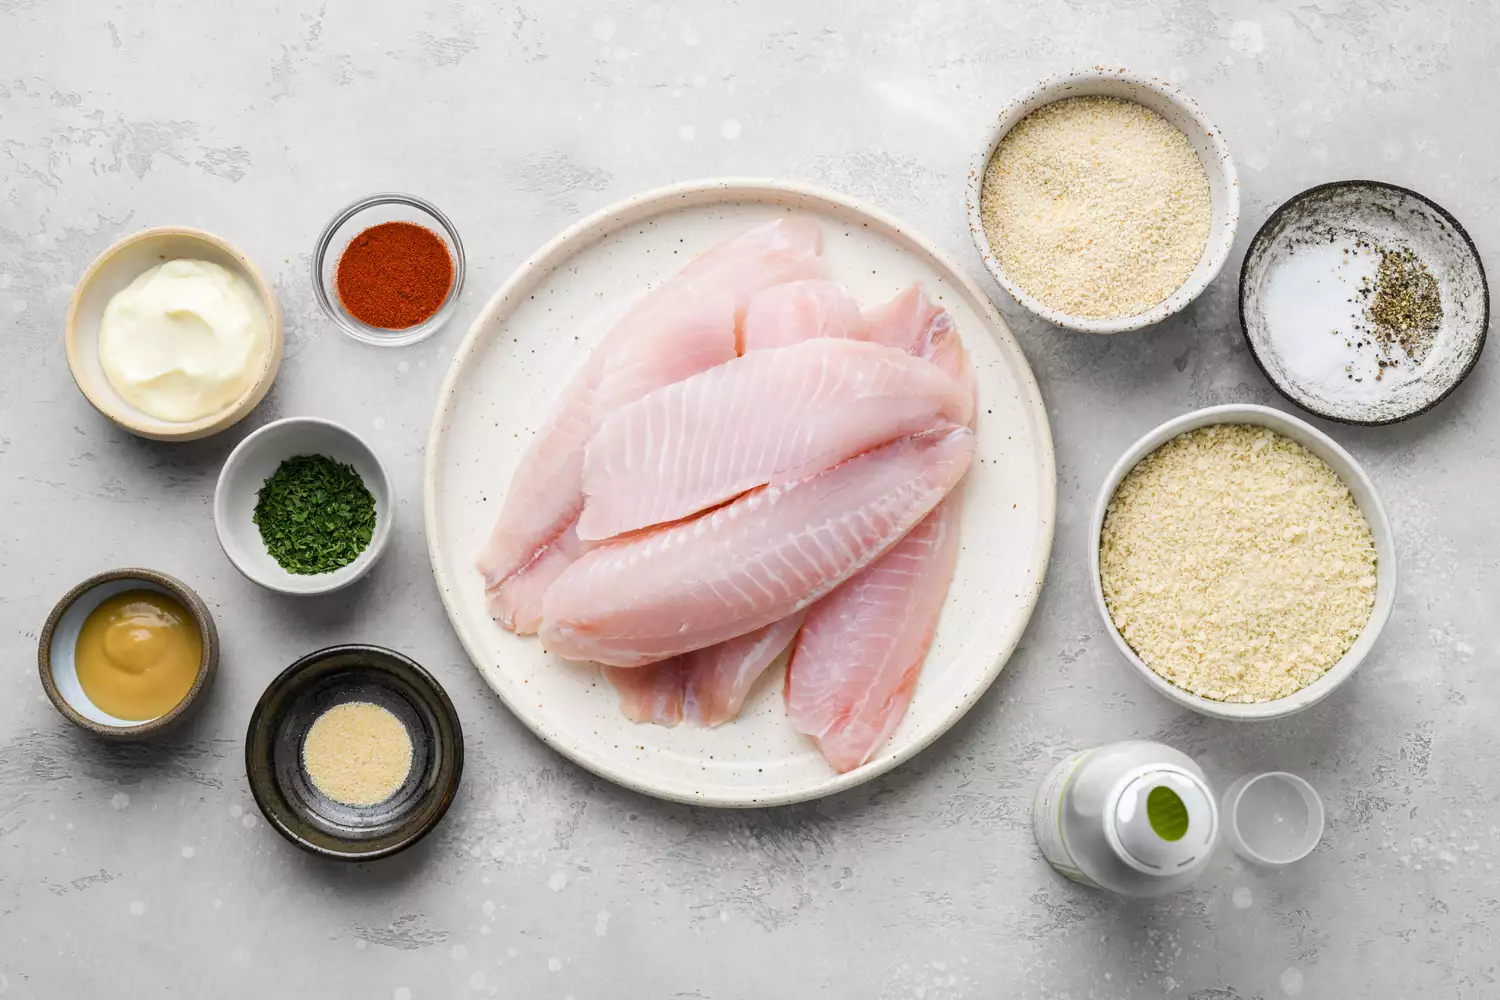 Ingredients for crunchy panko-crusted baked tilapia gathered